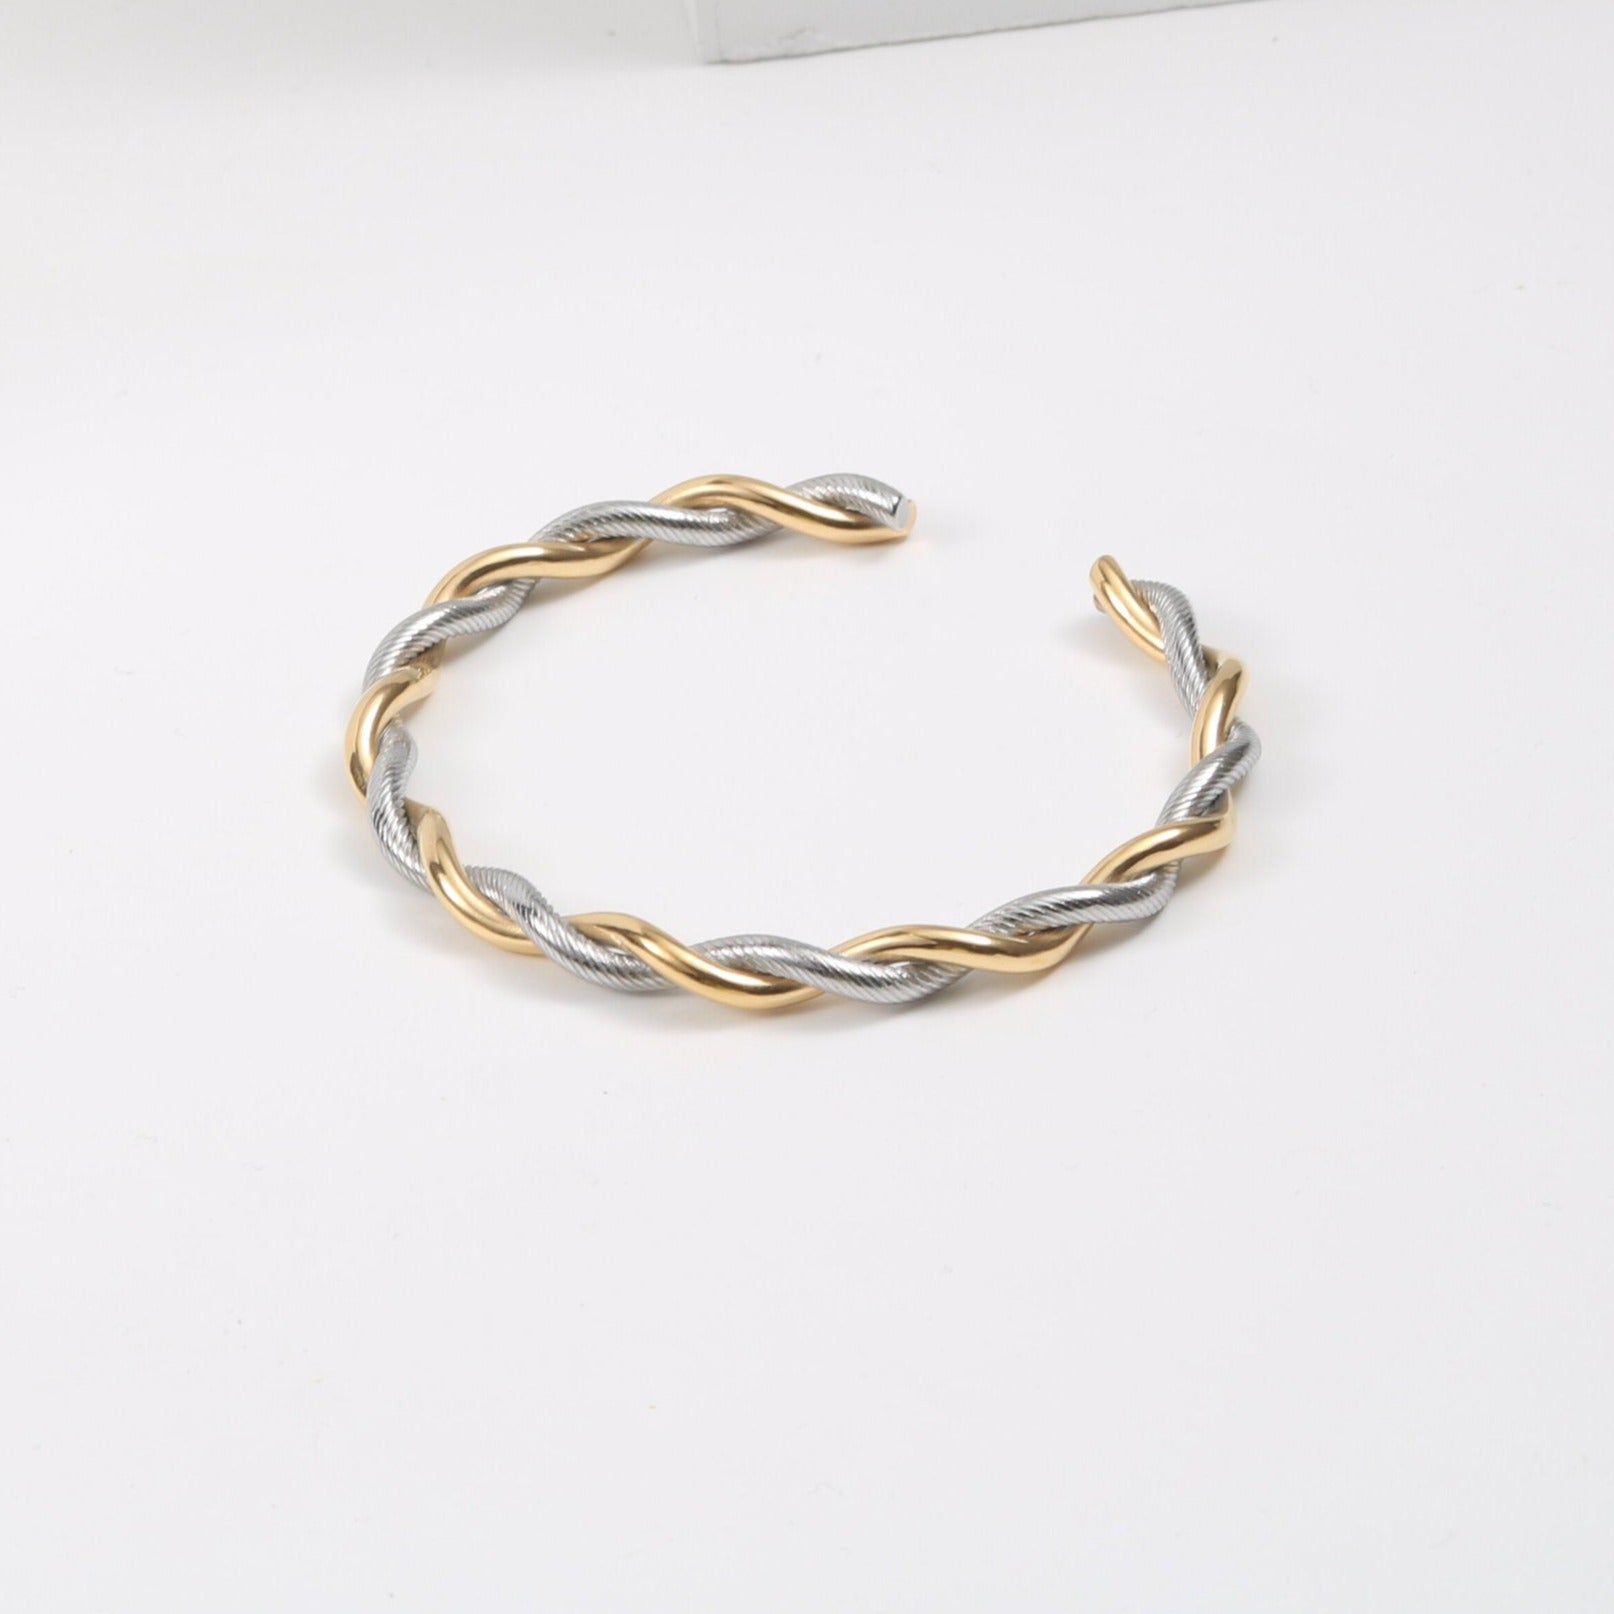 Double tone bangle, double tone bracelet, 18k gold plated bangle, 18k gold plated bracelet, 18k gold plated jewelry, water resistant jewelry, water resistant bracelet, birthday gift for her, ellie vail jewelryd, hello luxy jewelry, hey harper jewelry, the views and co jewelry